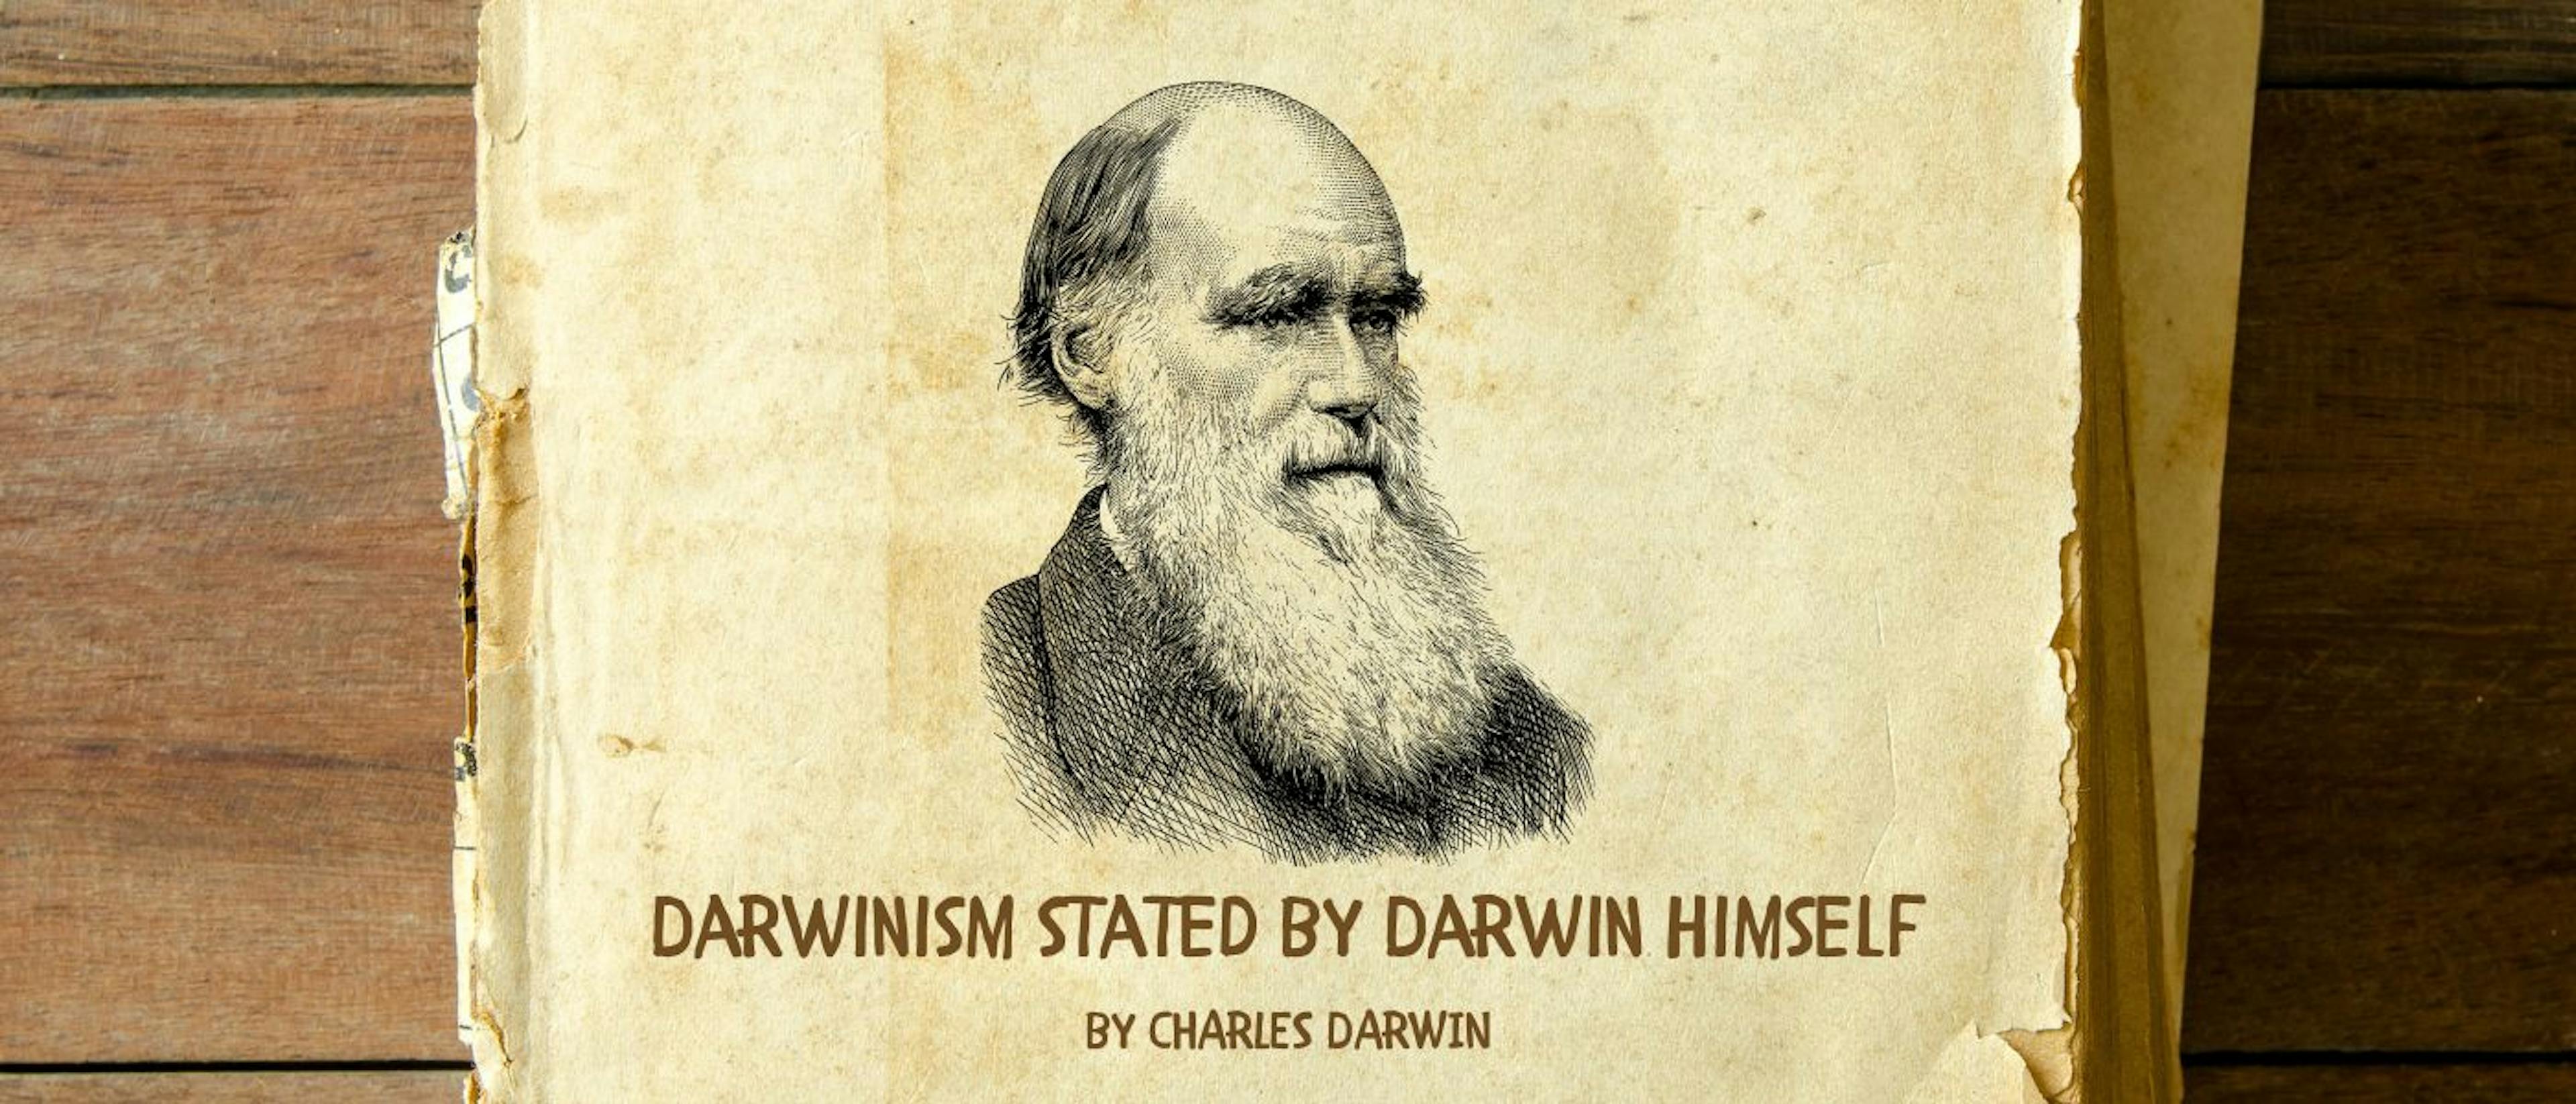 featured image - DARWIN AND HIS THEORIES FROM A RELIGIOUS POINT OF VIEW